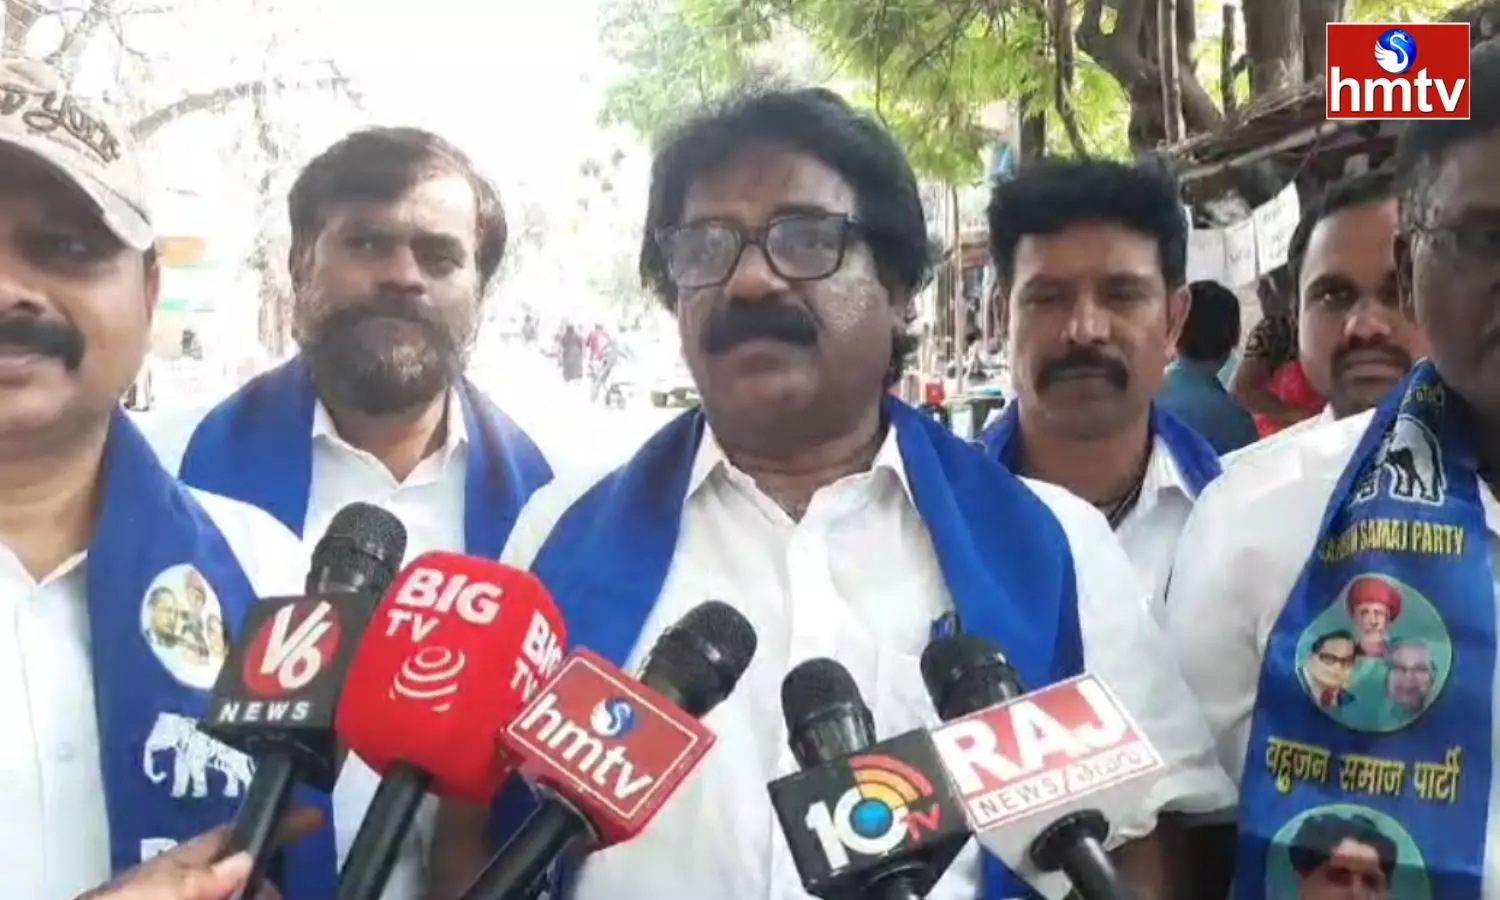 Dr. Baswanandam In Secunderabad As BSP MP Candidate